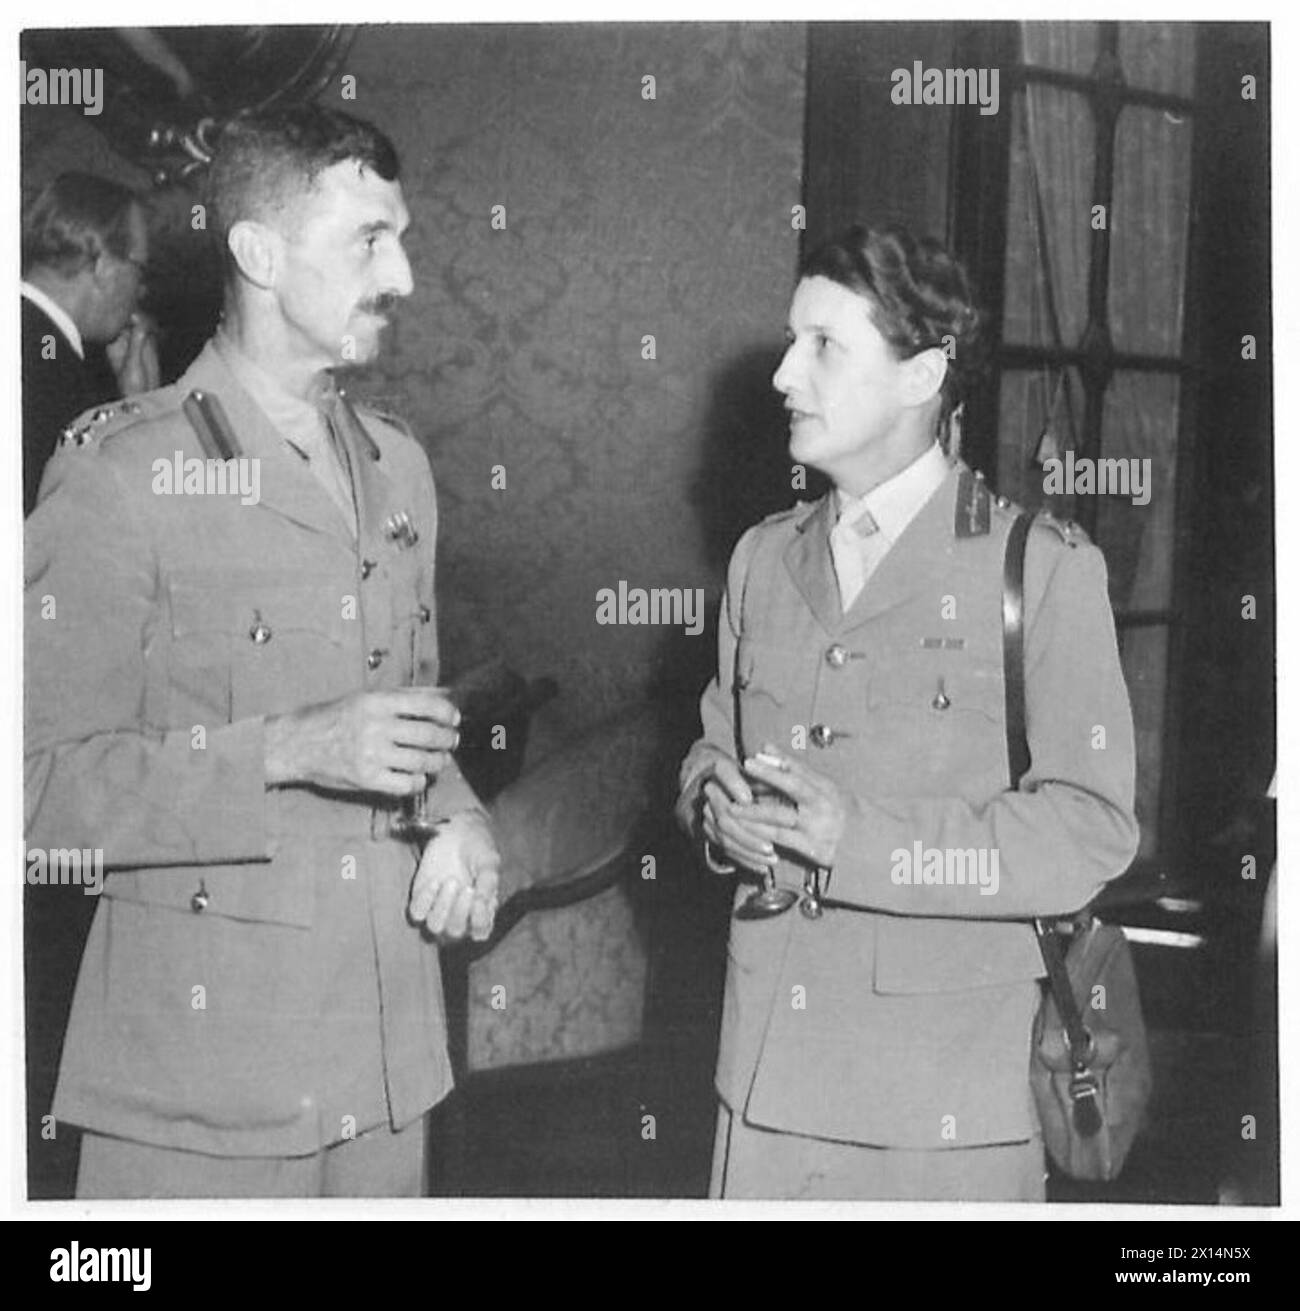 DIRECTOR A.T.S. IN ITALY - Mrs. Whateley and Brigadier Low together at a dinner at the Hotel Ambassy British Army Stock Photo